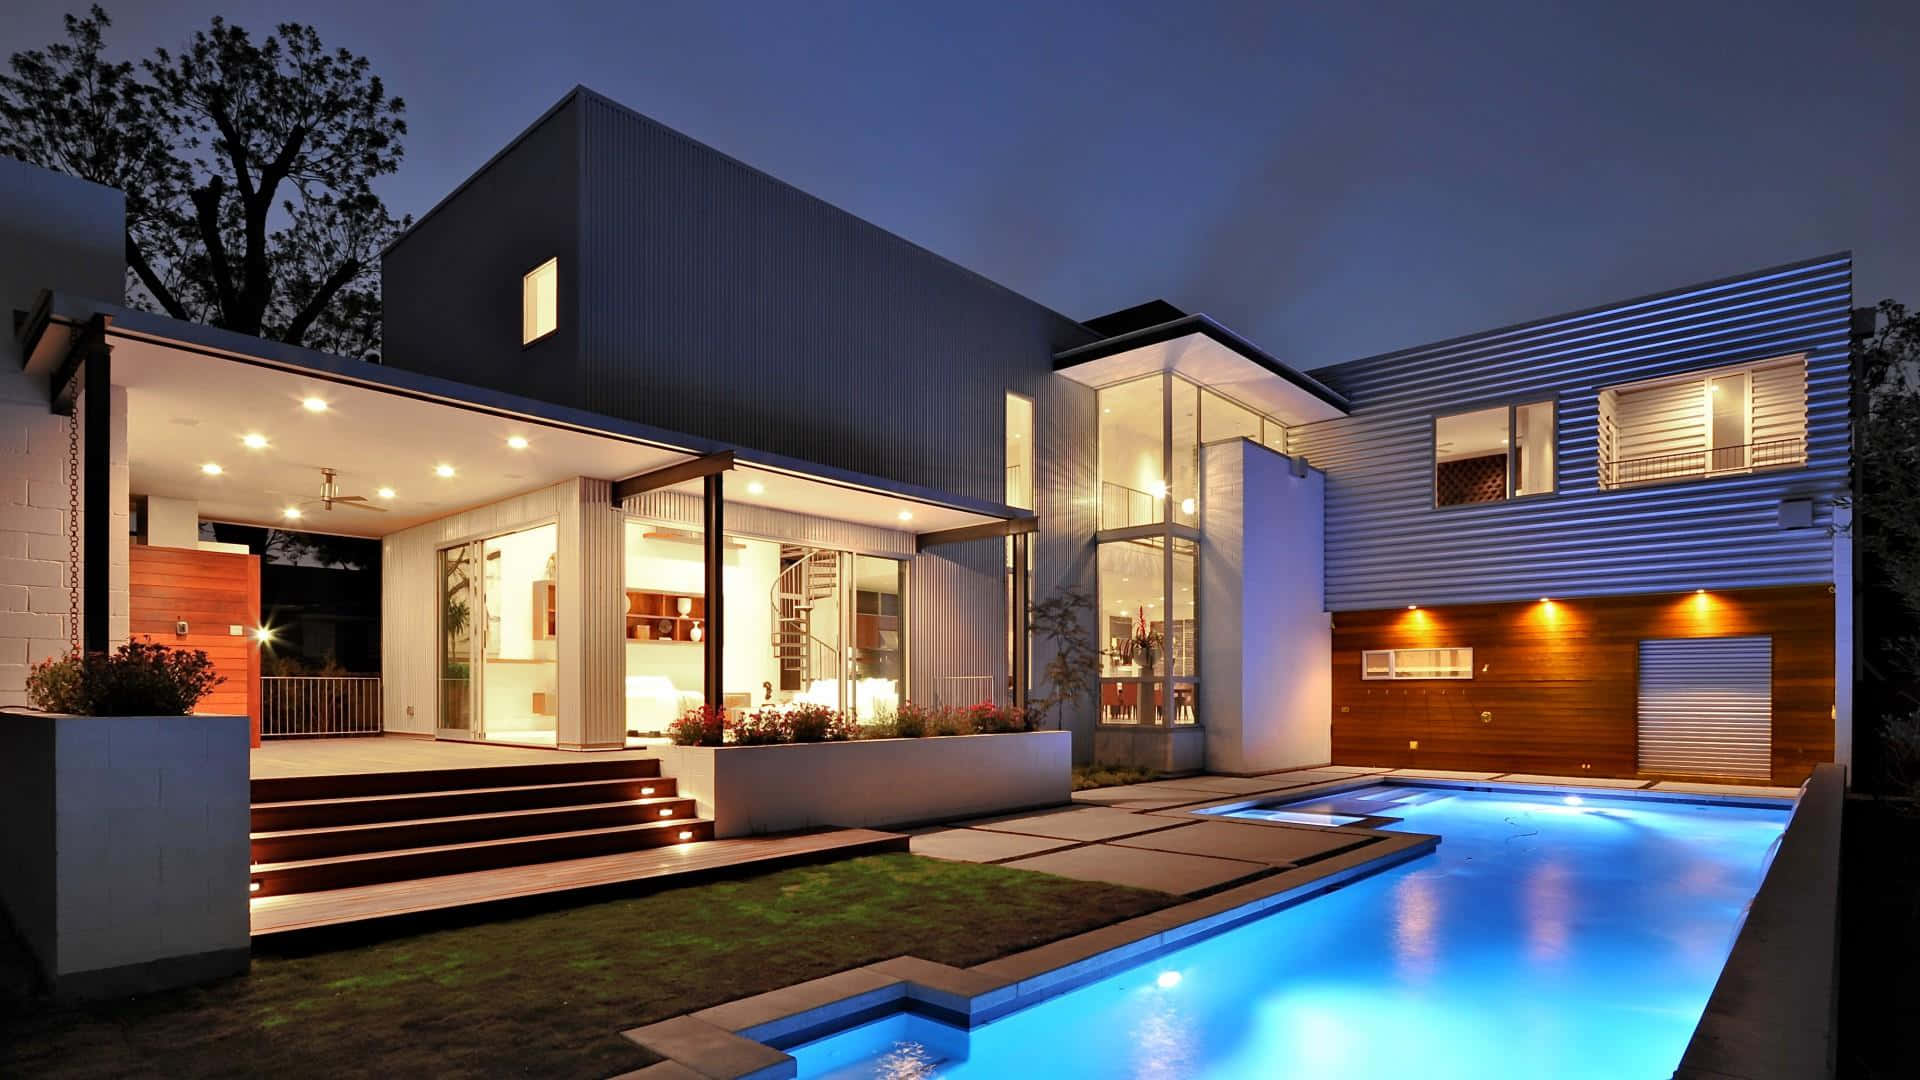 Modern House With Pool And Stairs At Night